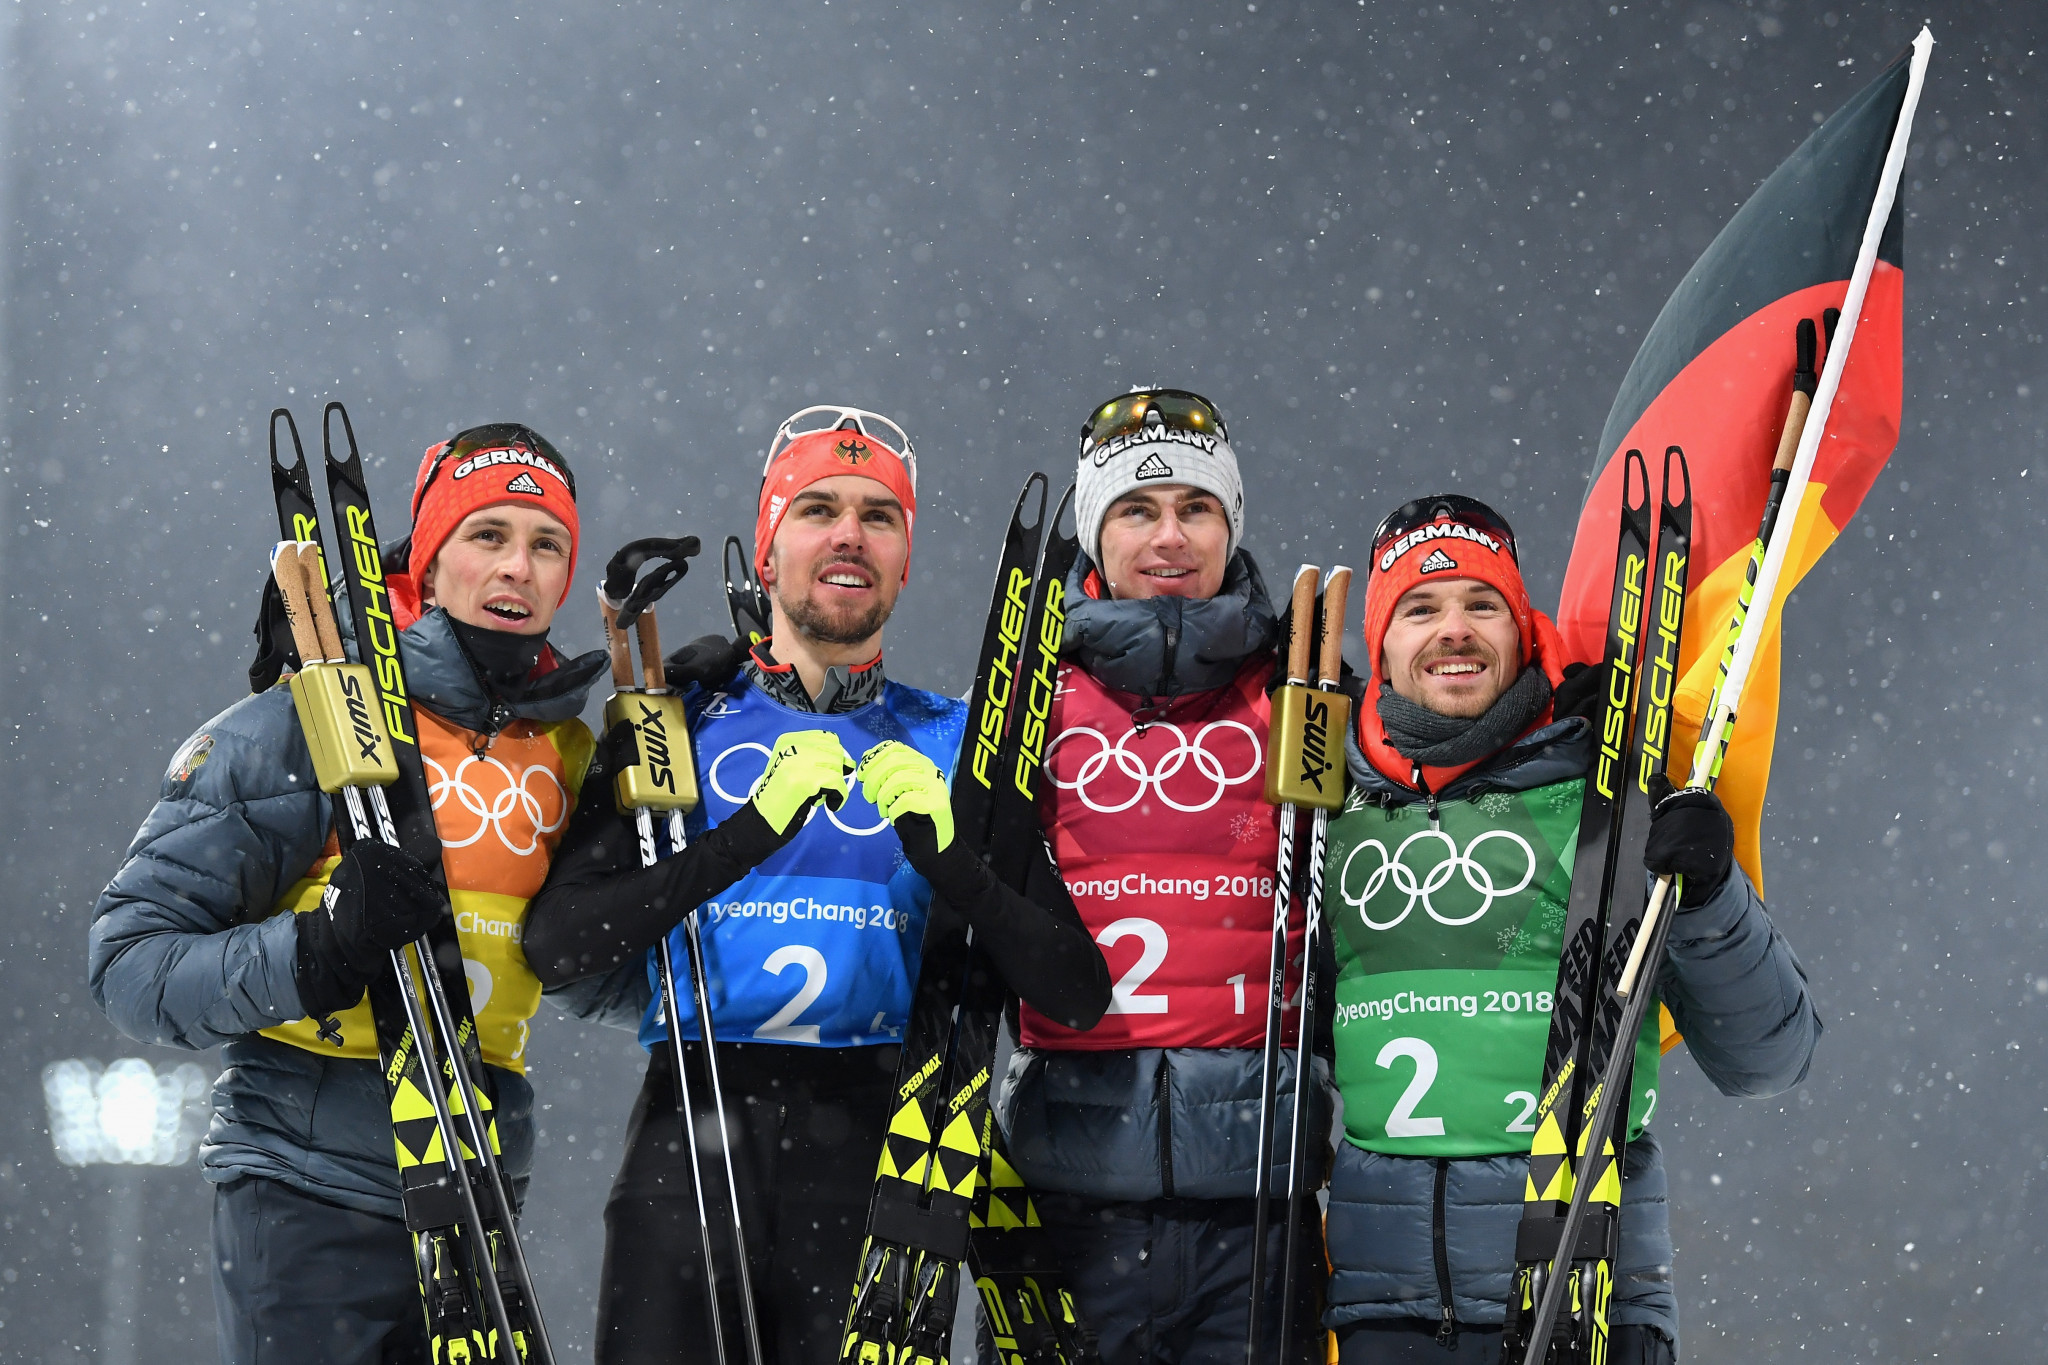 Germany won their first Nordic combined team Olympic gold medal for 30 years today to make it a clean sweep of victories in the sport at Pyeongchang 2018 ©Getty Images